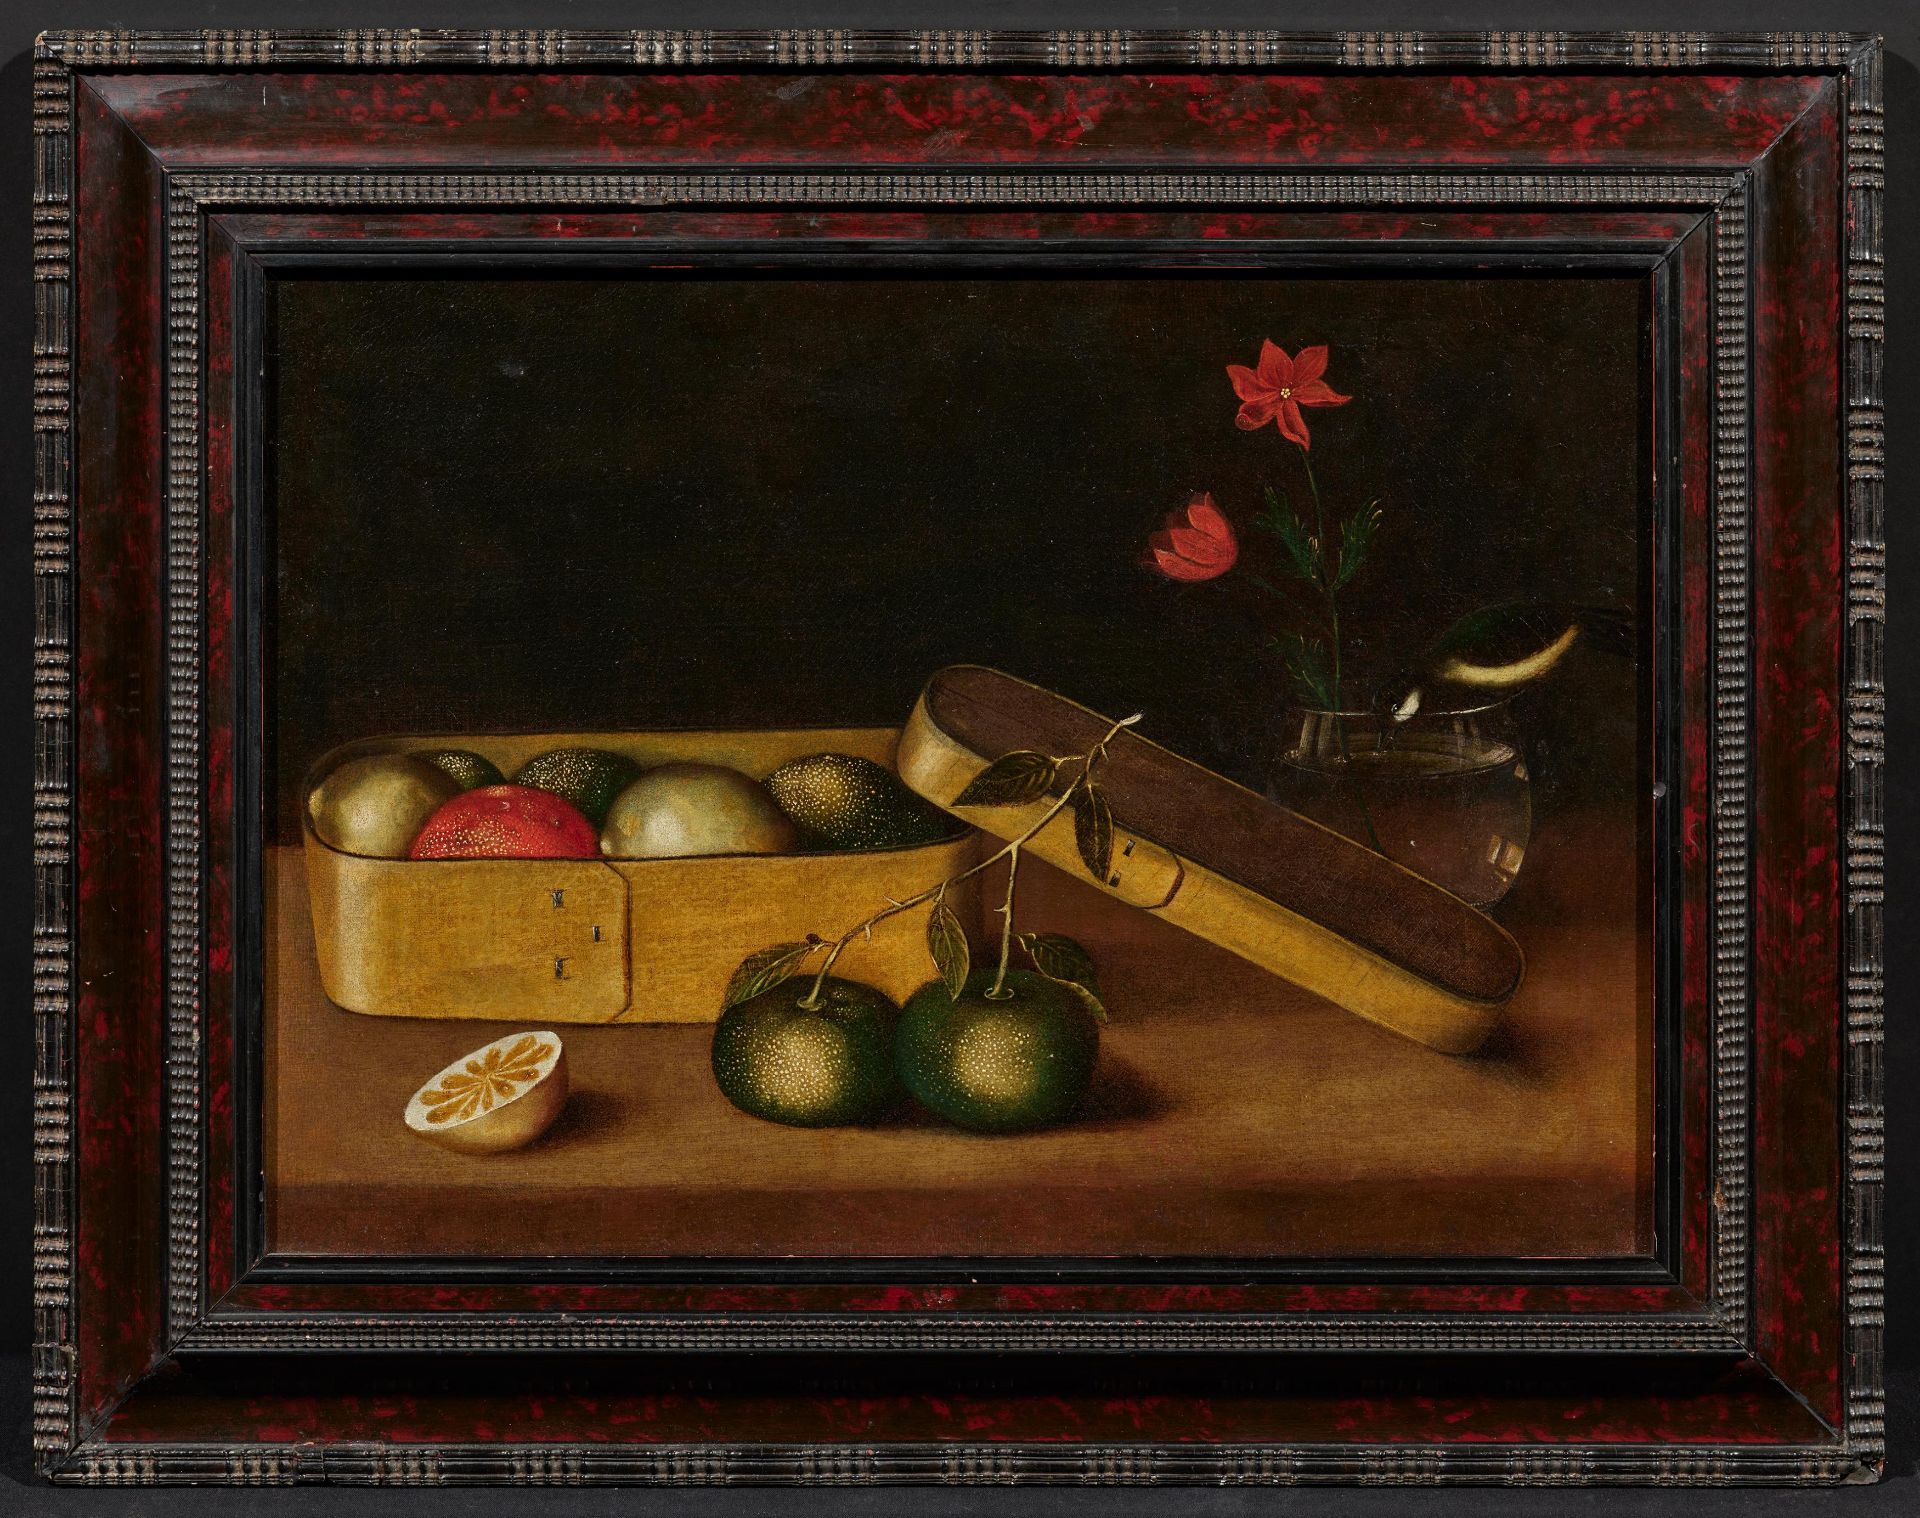 Sebastian Stoskopff: Still Life with a Shavings Box, Citrus Fruits and a Goldfinch - Image 2 of 4